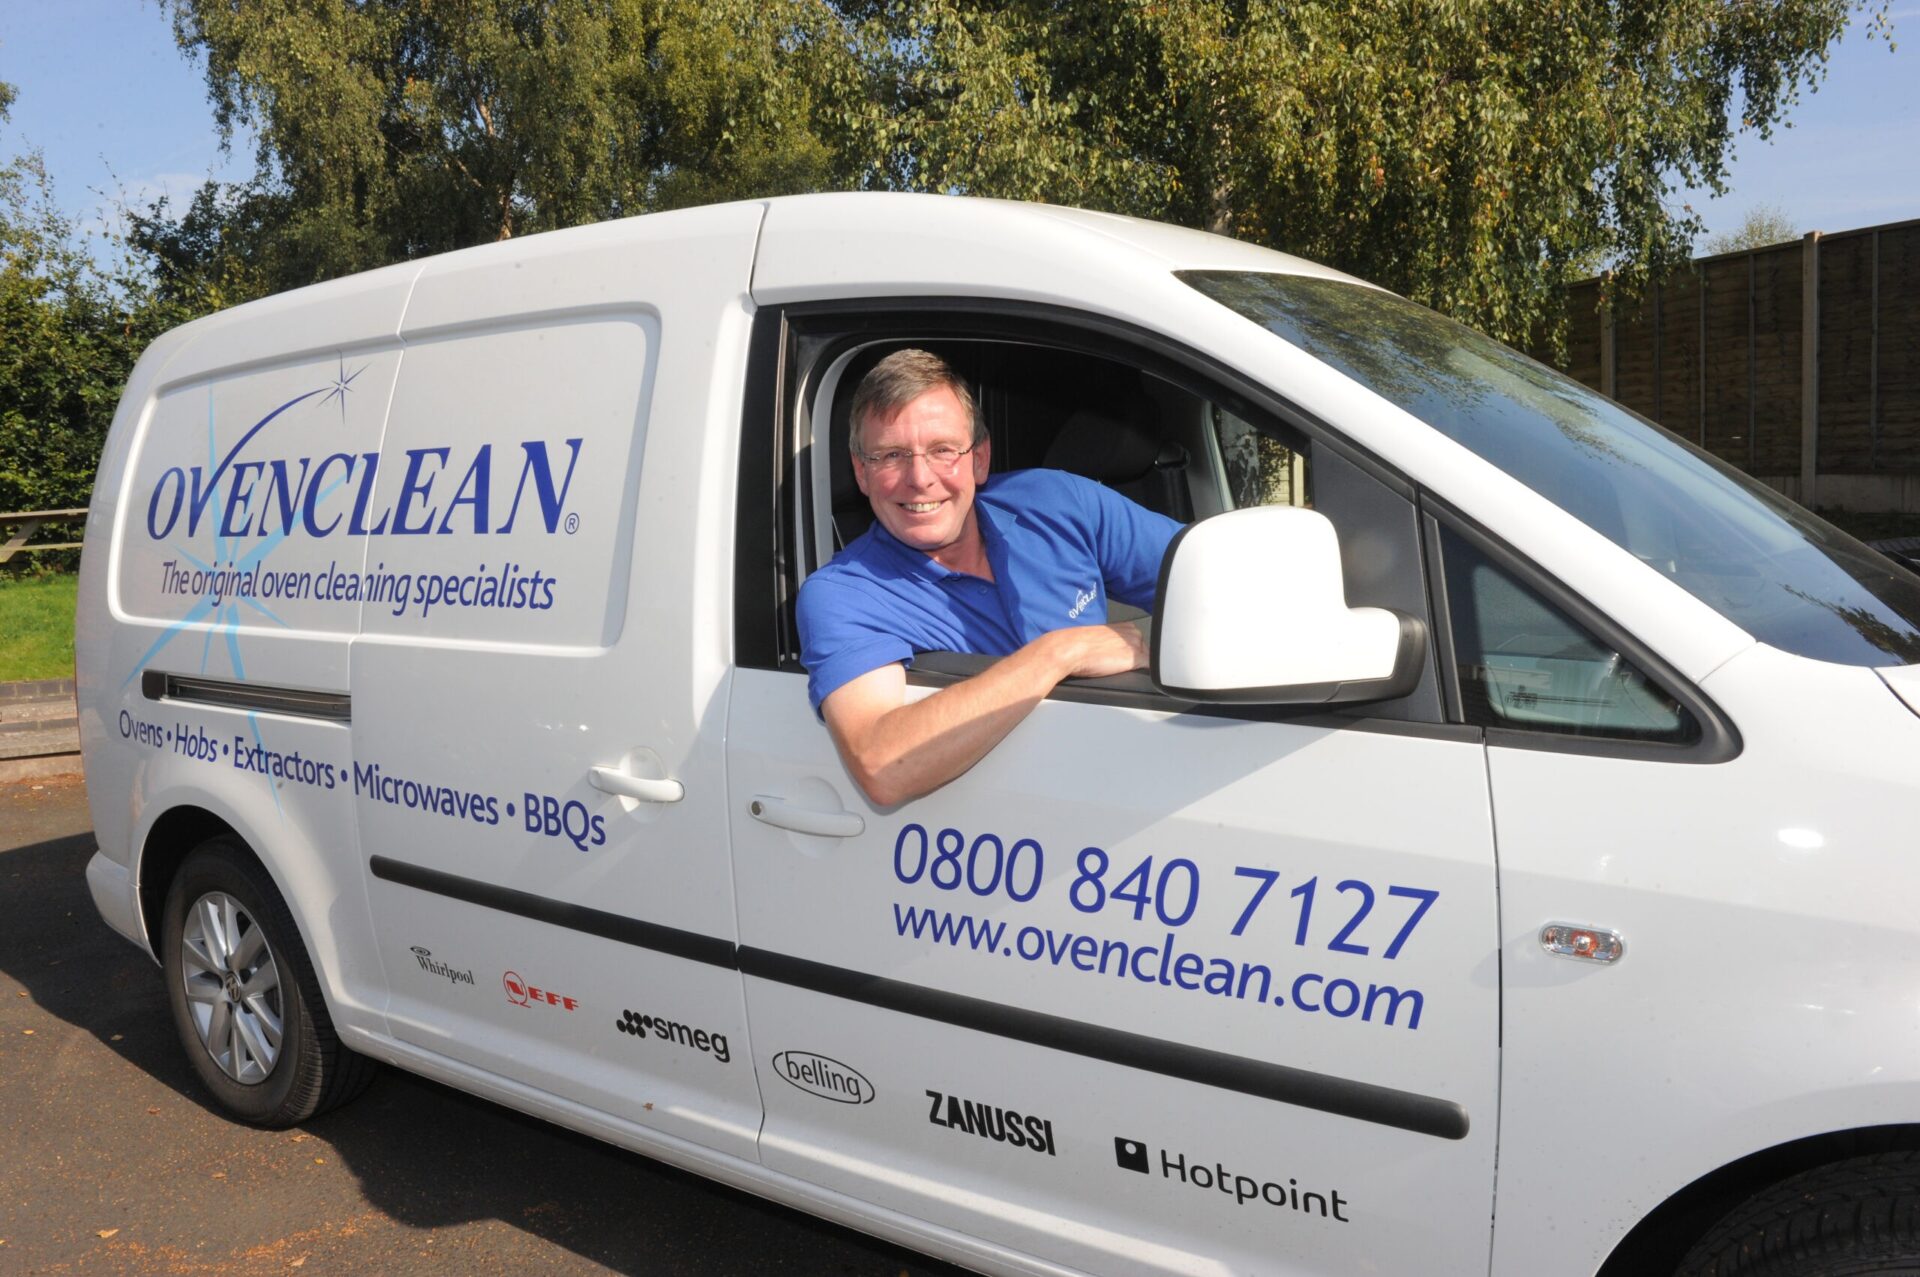 Ovenclean franchisees celebrate most successful July on record